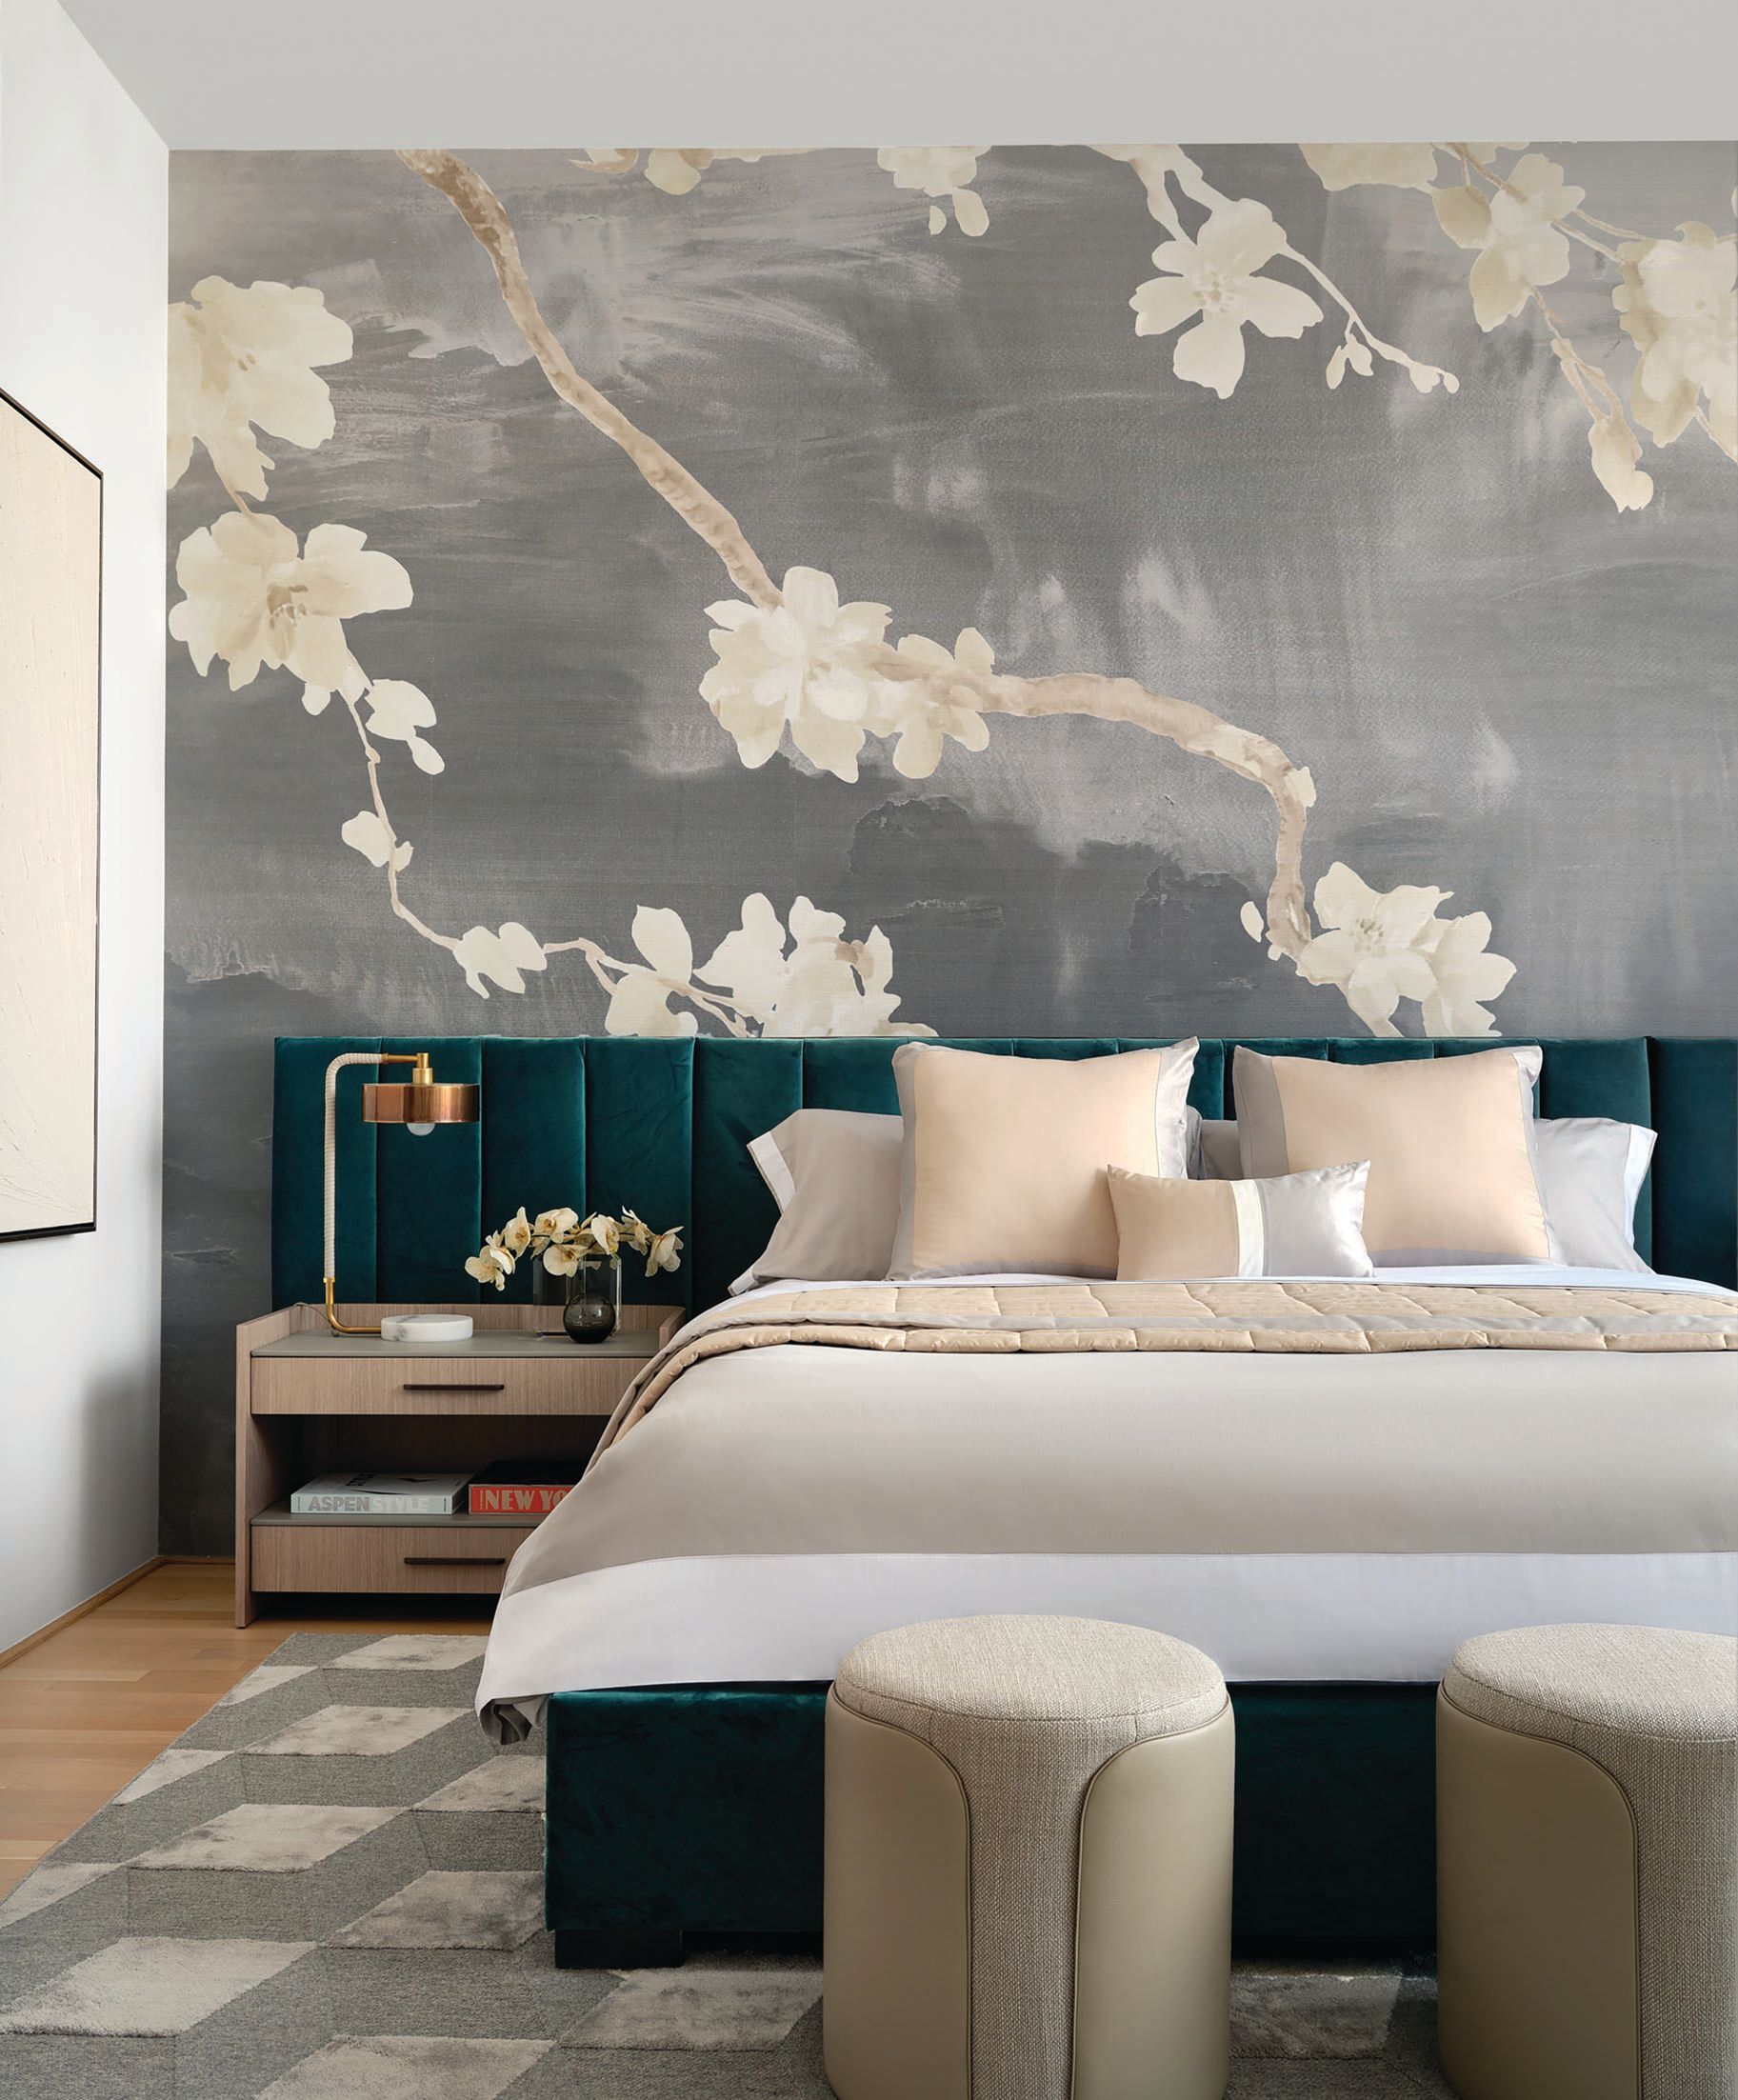 A Nina Magon bed and nightstand, Surya rug and Phillip Jeffries wallcovering. PHOTOGRAPHY BY SEAN LITCHFIELD